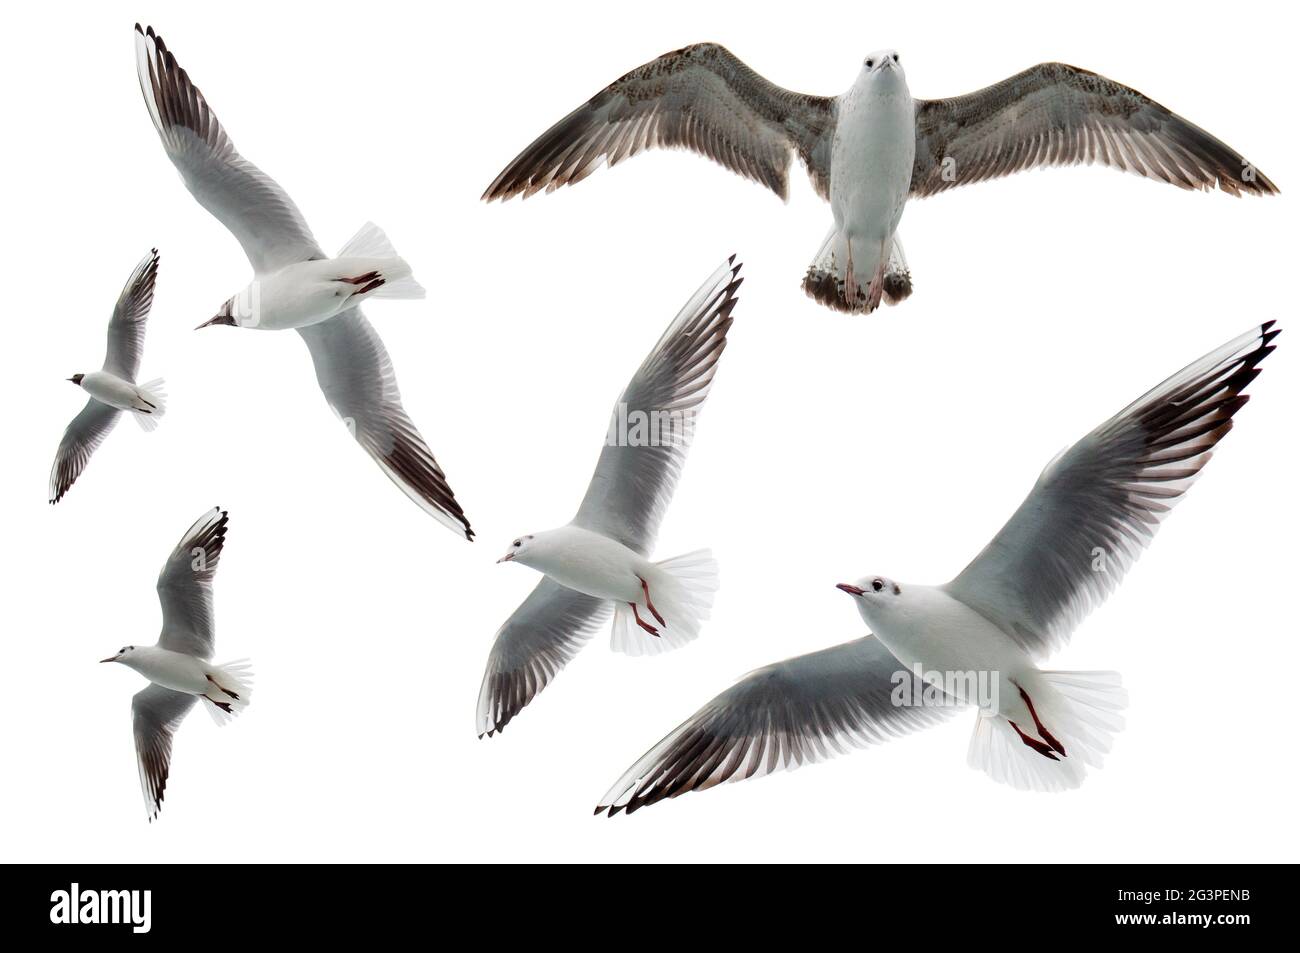 Set of seagulls flying isolated on white background. Birds collection isolated on white. Group of sea gulls Stock Photo